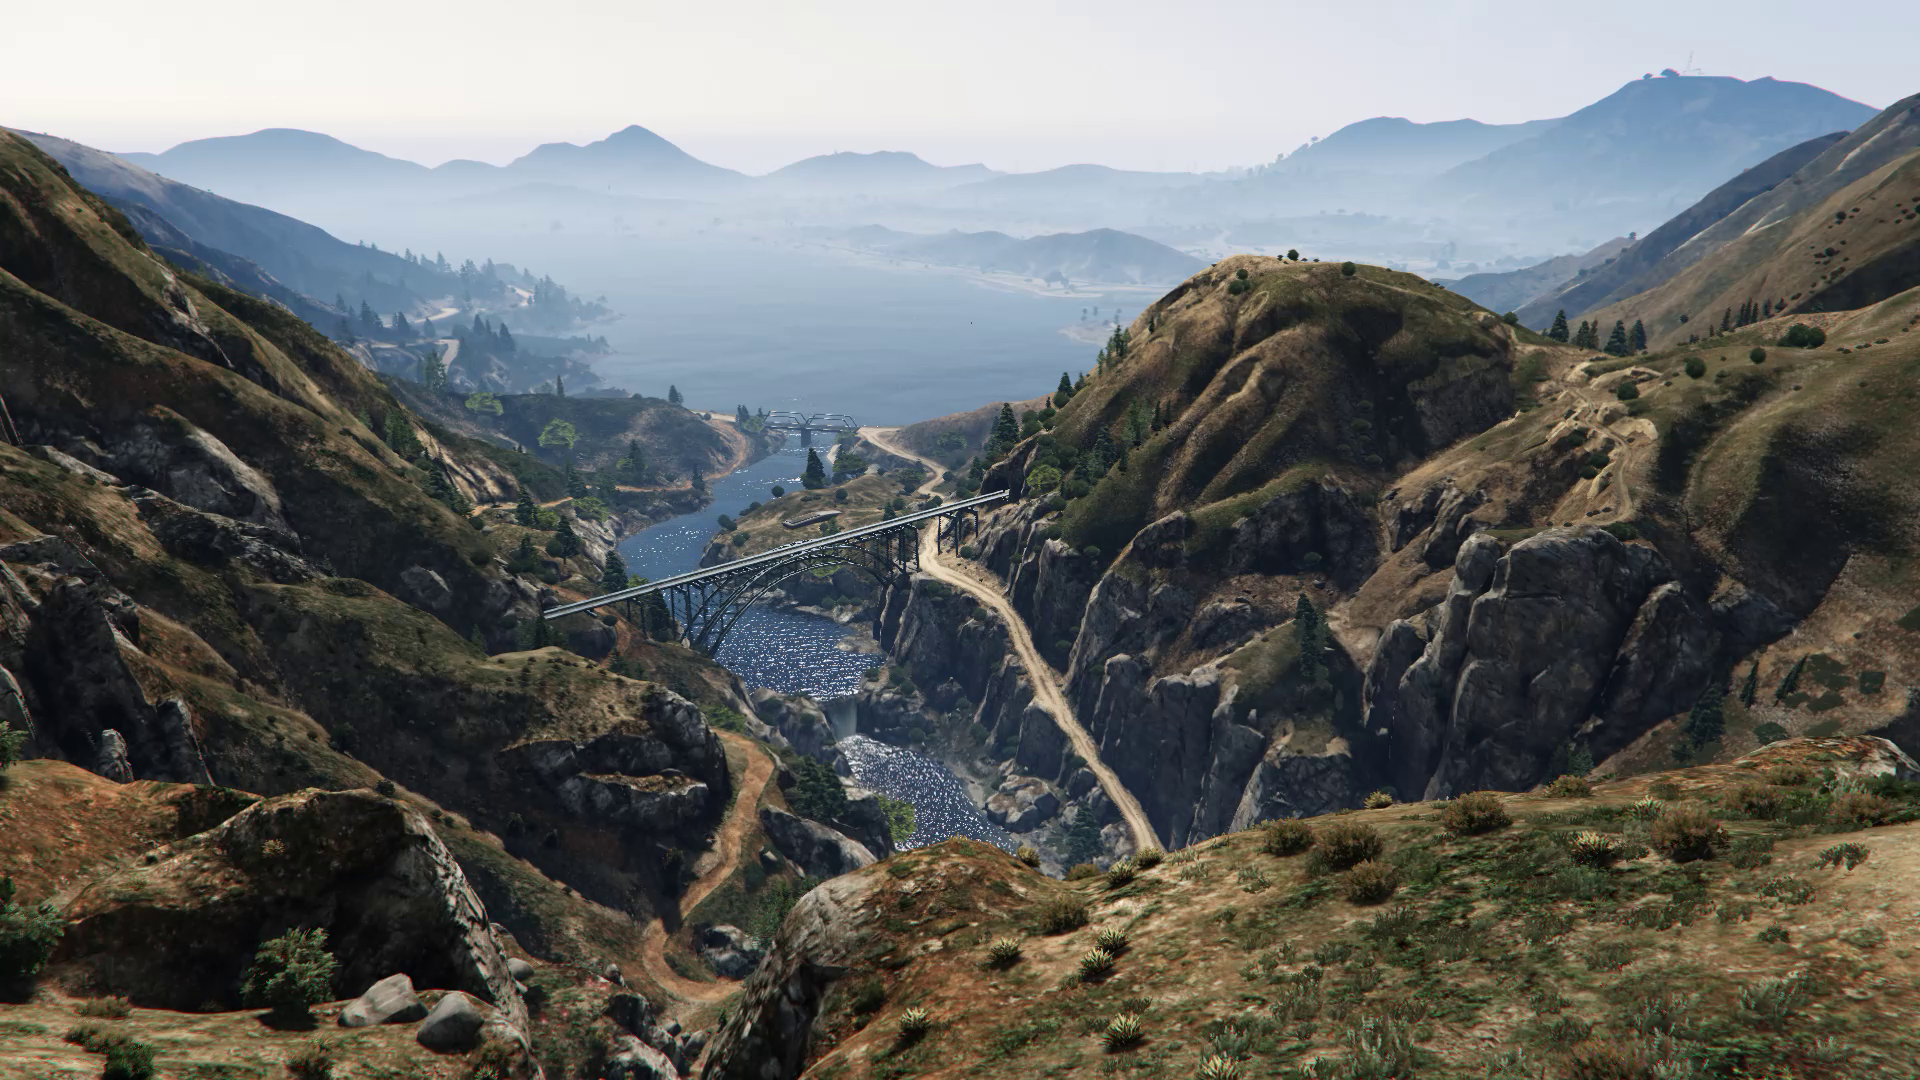 General 1920x1080 video game landscape Grand Theft Auto Online Grand Theft Auto V video games Rockstar Games PC gaming Grand Theft Auto CGI mountains